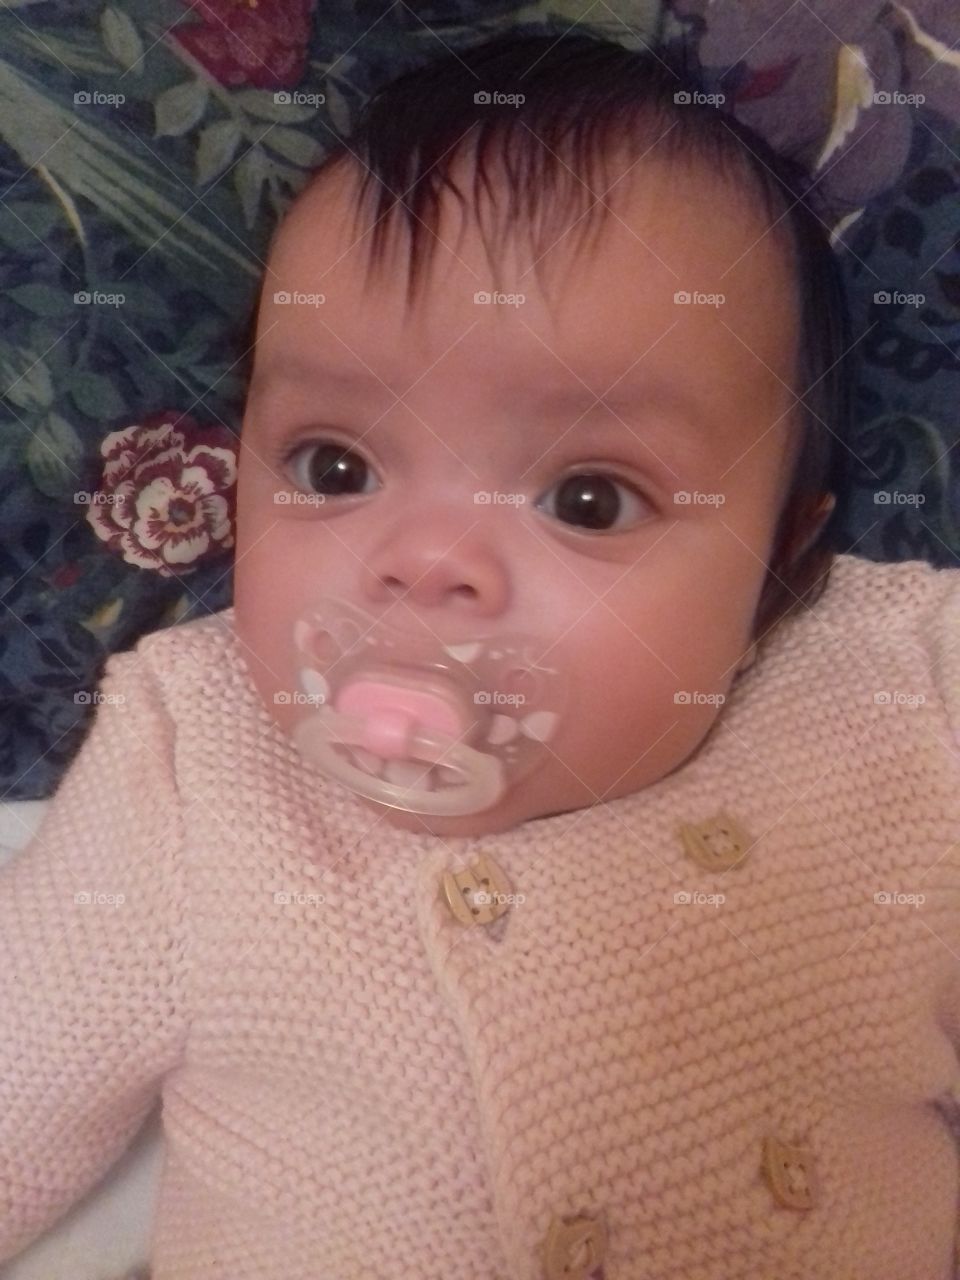 wearing her sweater for winter and take her pacifier